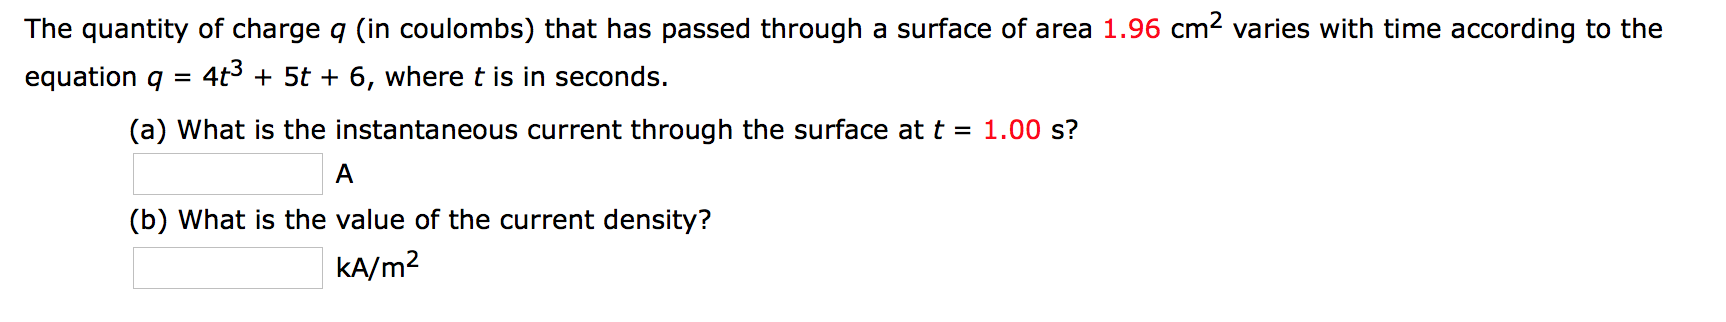 The quantity of charge q (in coulombs) that has passed through a surface of area 1.96 cm2 varies with time according to the
equation q
4t3 + 5t + 6, where t is in seconds.
(a) What is the instantaneous current through the surface at t = 1.00 s?
(b) What is the value of the current density?
KA/m2
